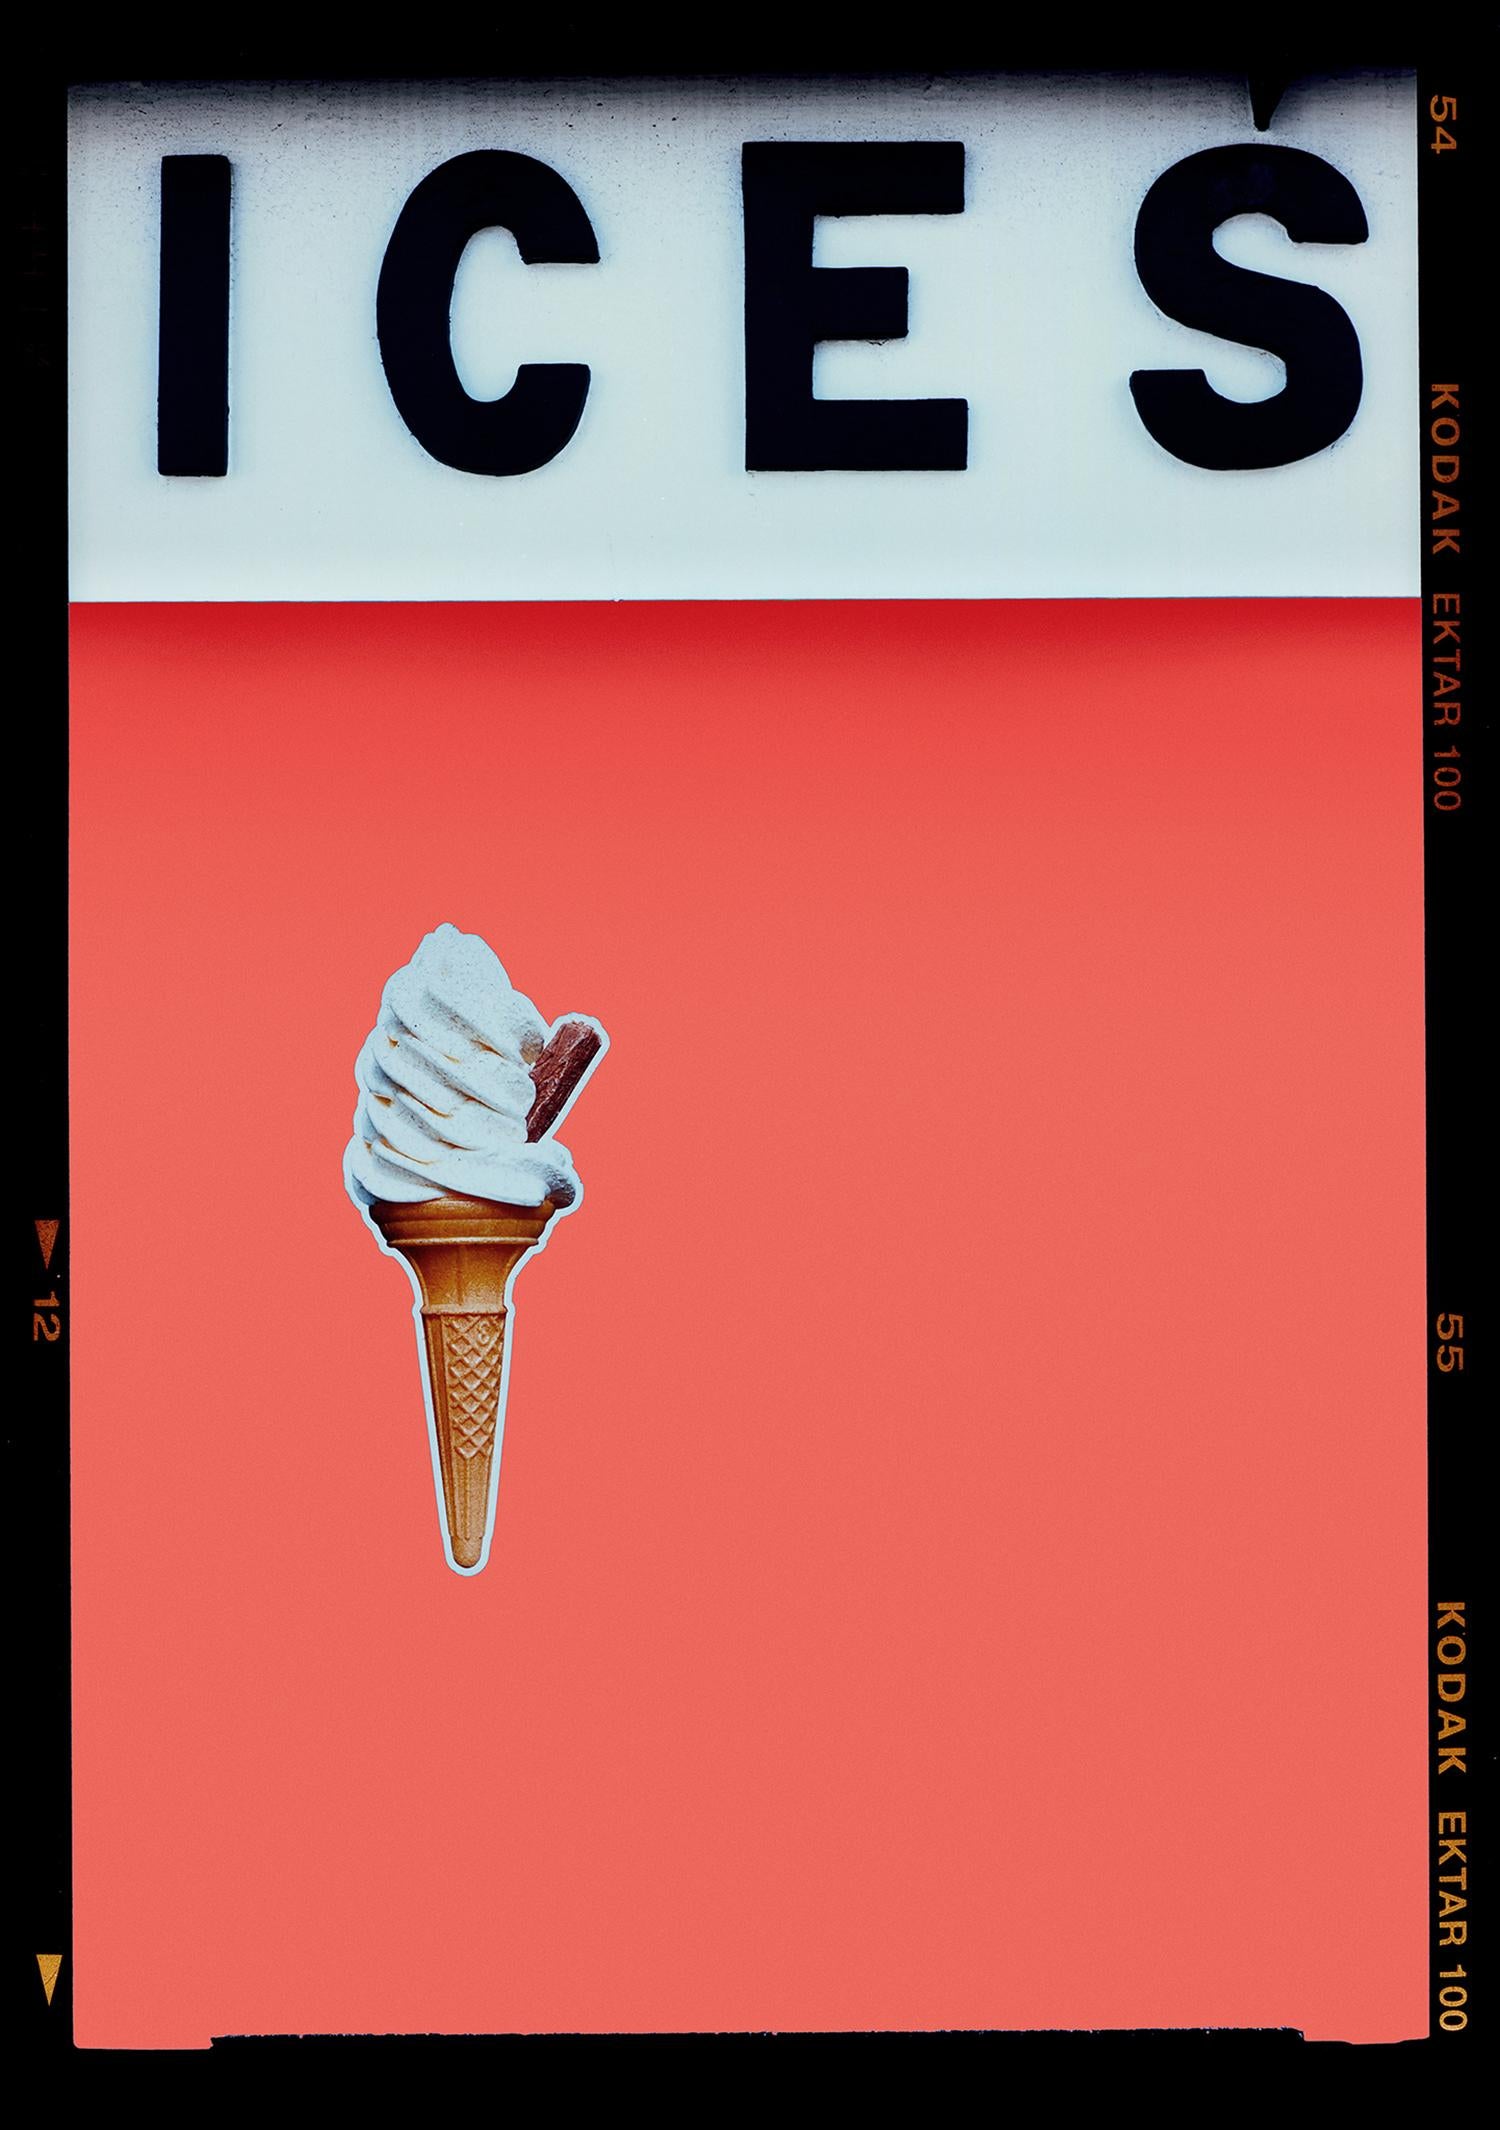 Richard Heeps Print - Ices (Melondrama), Bexhill-on-Sea - British seaside color photography